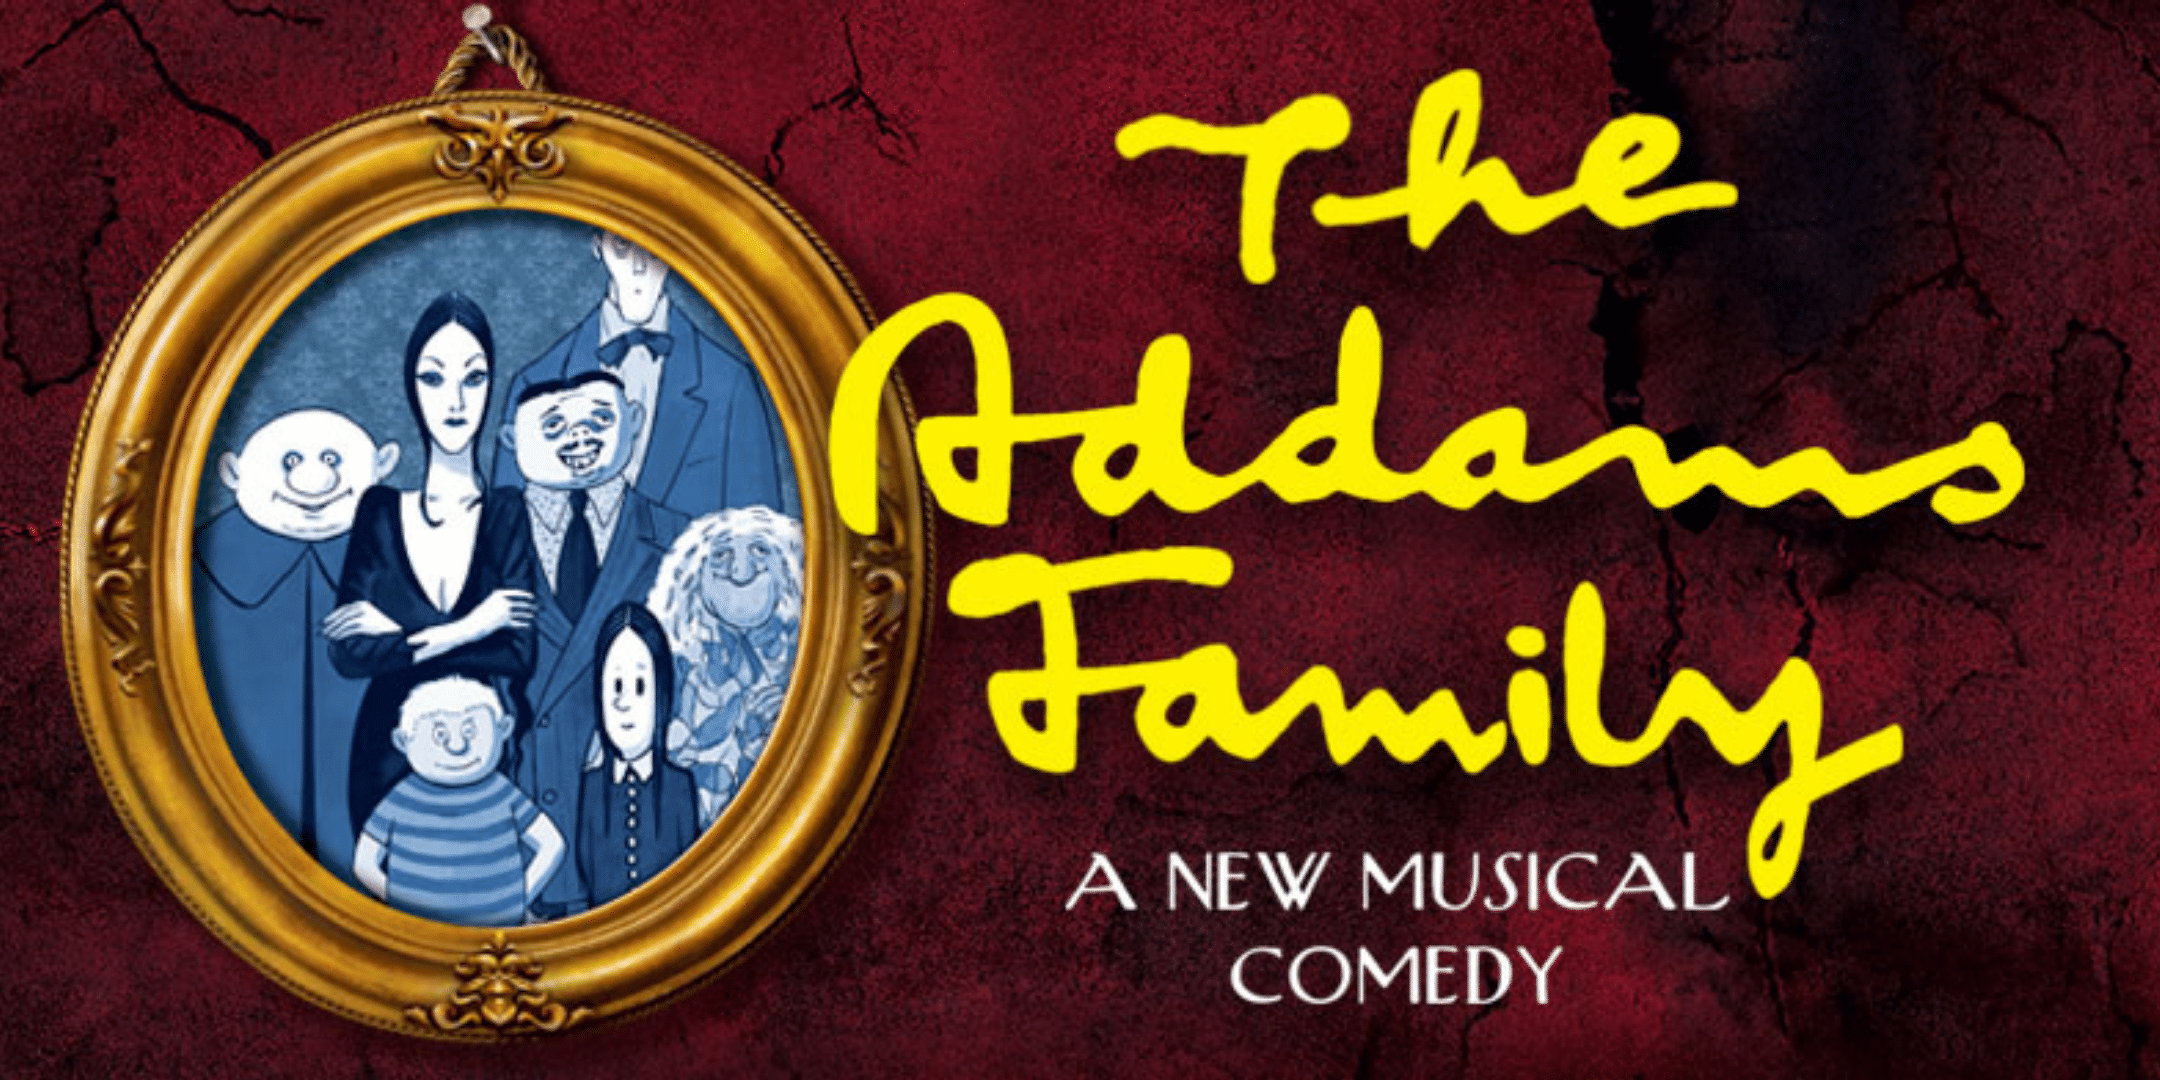 The Addams Family A New Musical - Summerlin